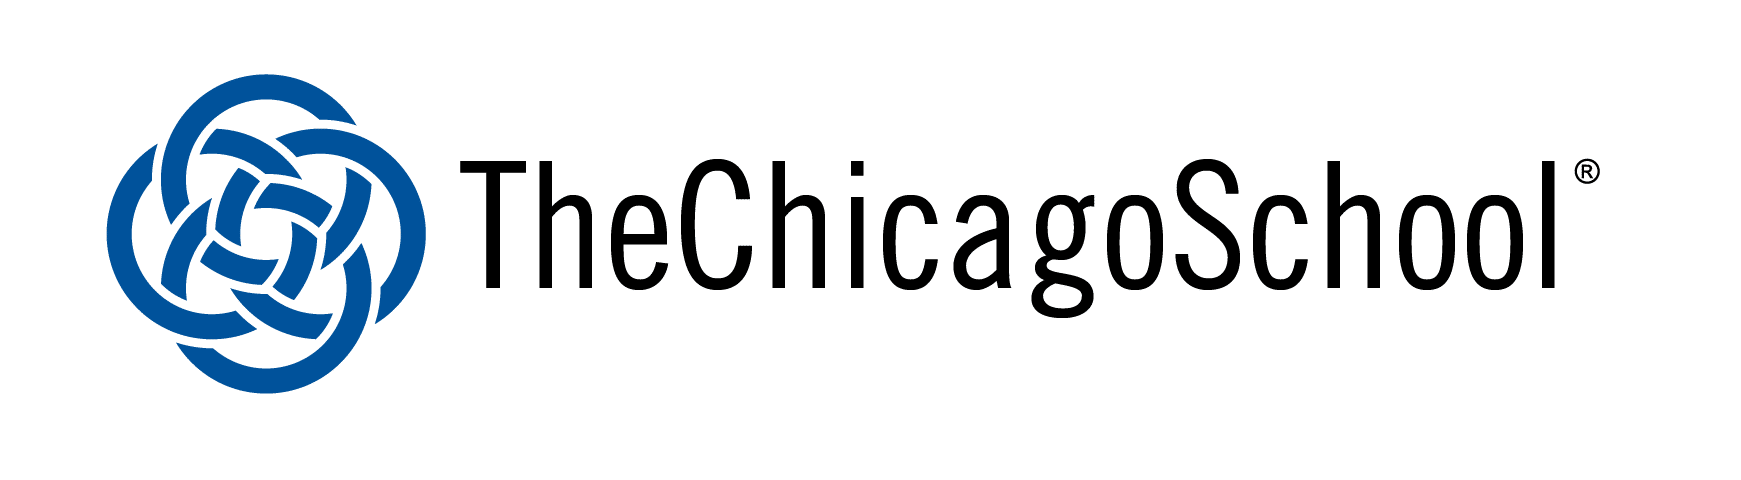 Ph.D. in Counselor Education and Supervision Program at The Chicago School